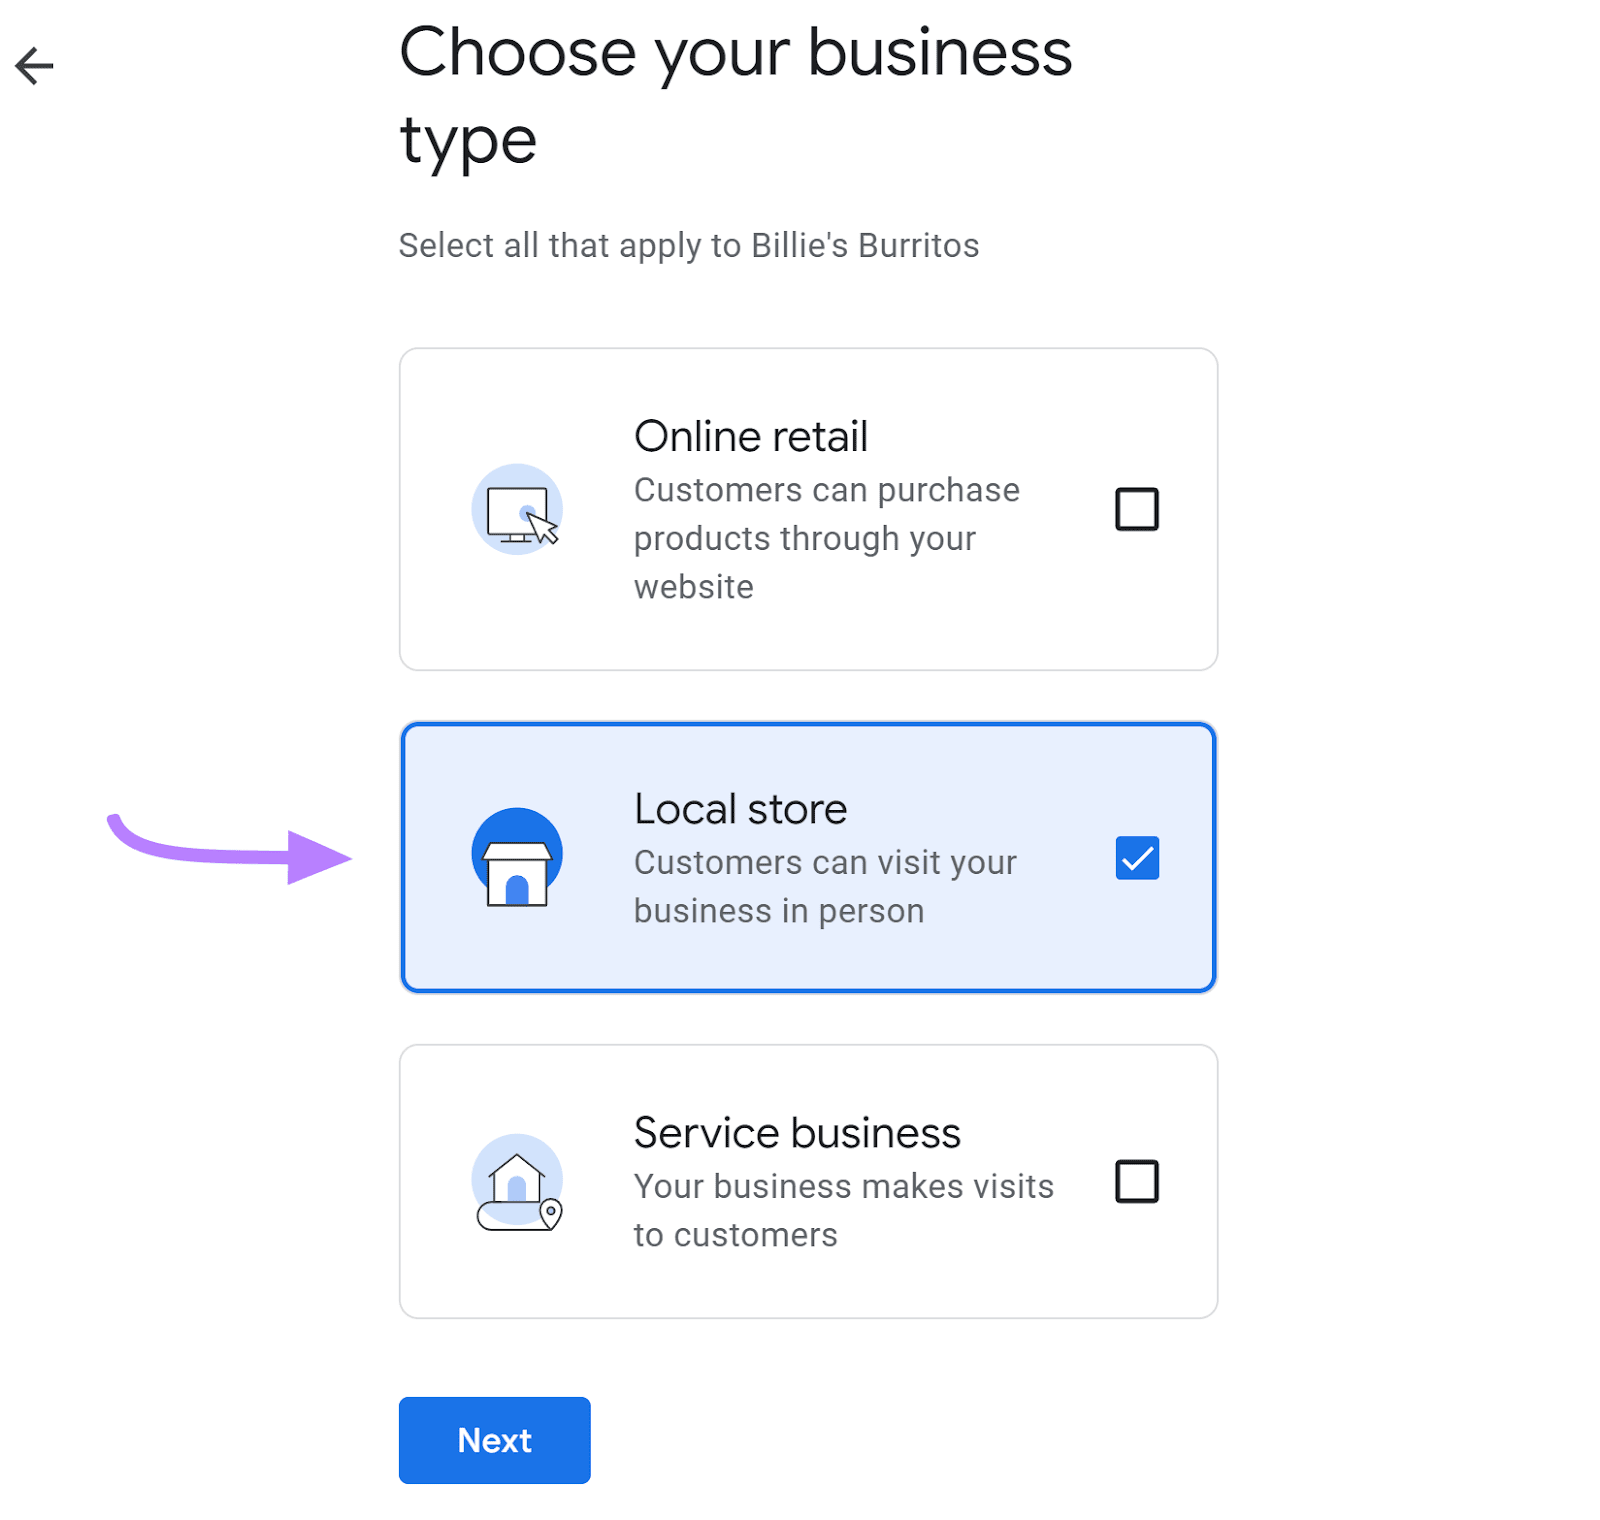 "Local store" option selected under "Choose your business type" window in Google Maps